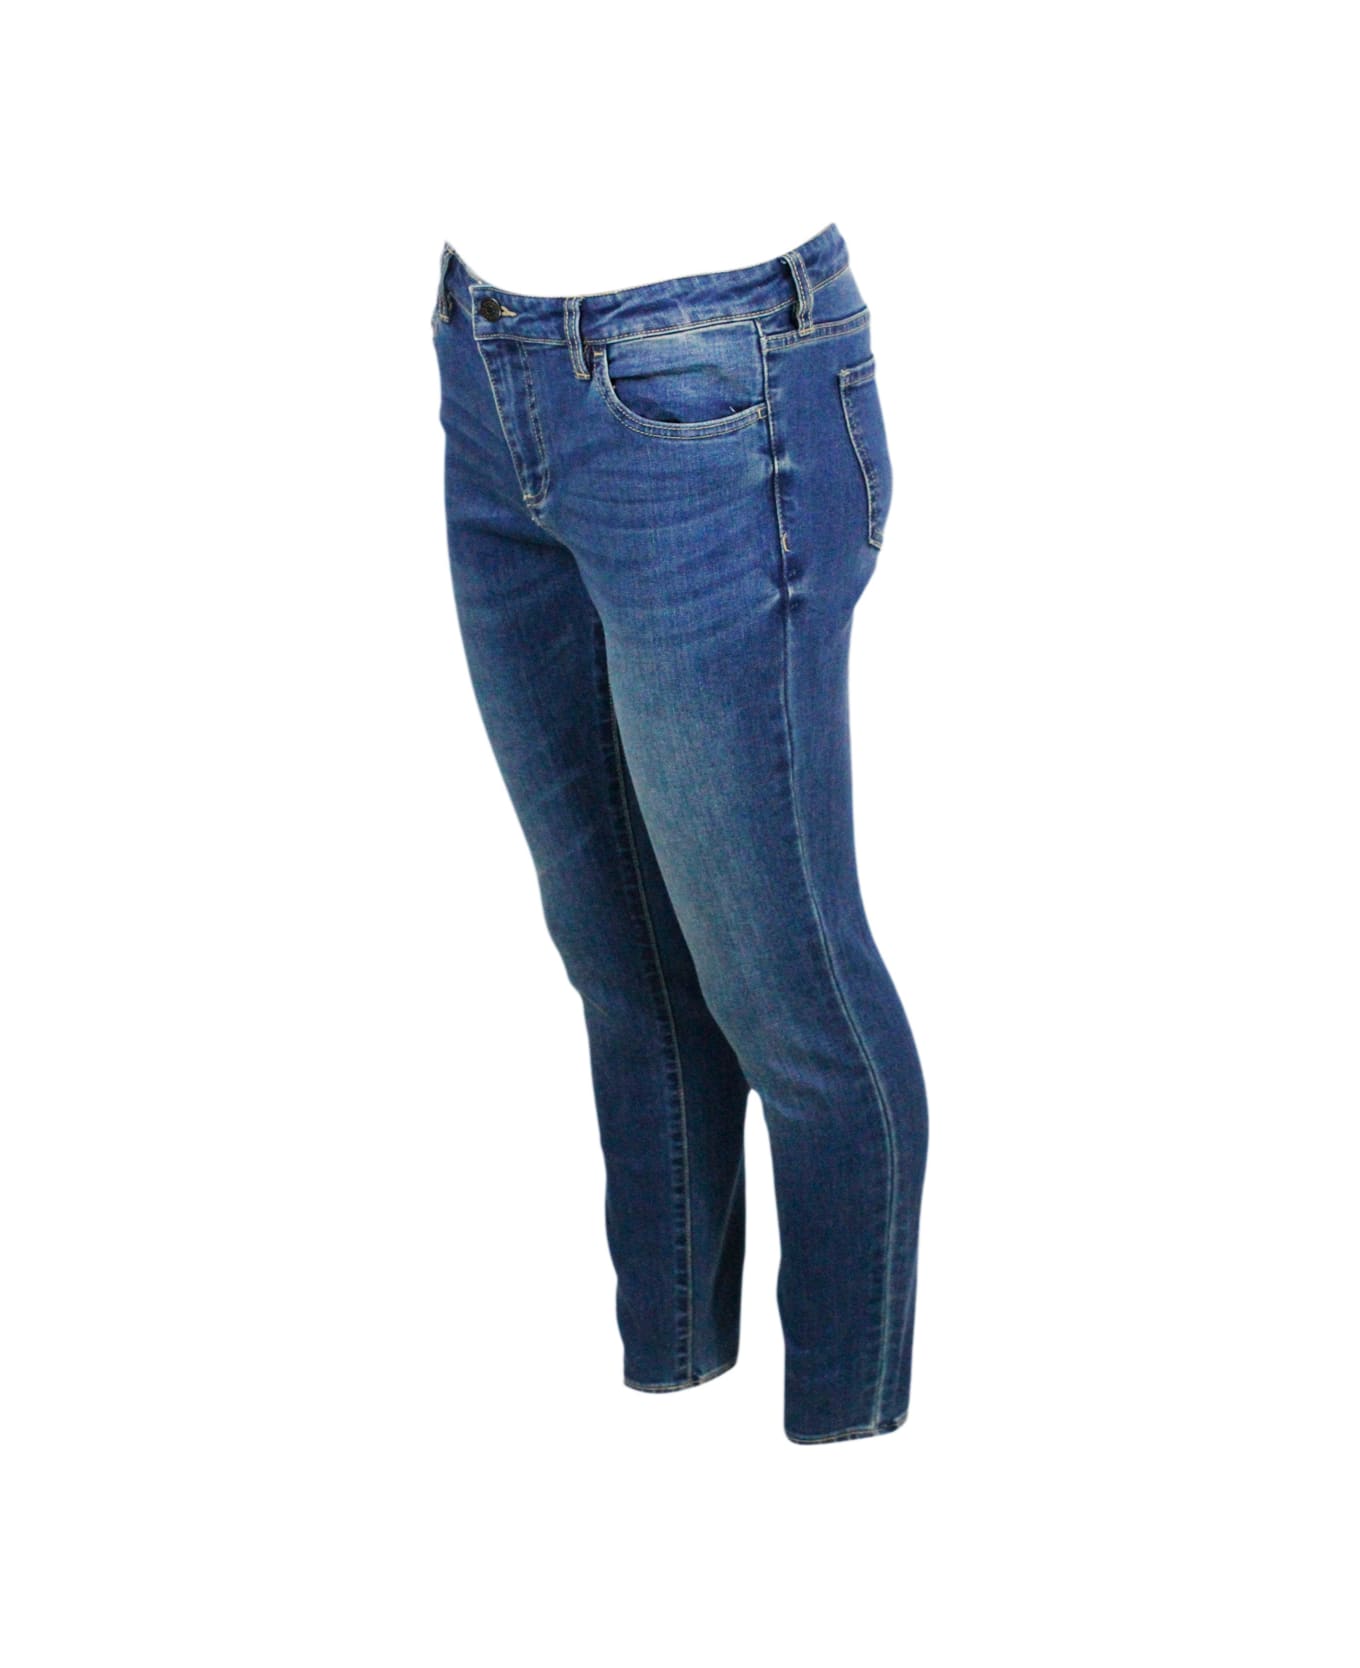 Armani Collezioni Super Skynny Mid Rise Jeans Trousers In Stretch Denim With Logo On The Back Pocket - Denim